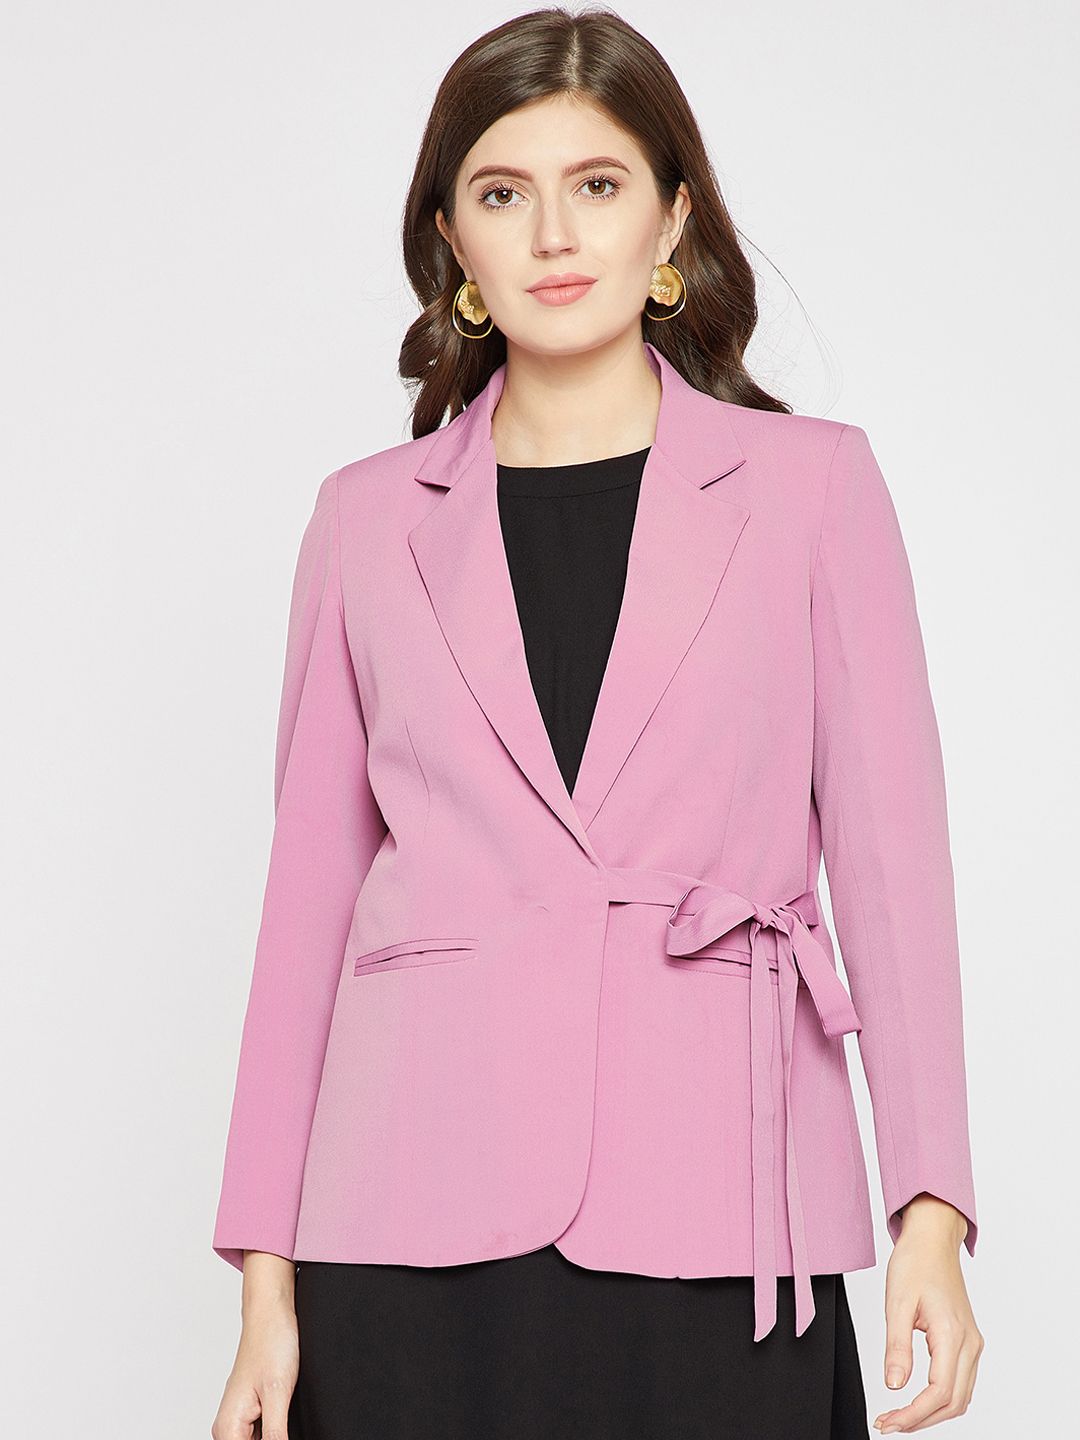 Marie Claire Wome Purple Single-Breasted Blazer Price in India